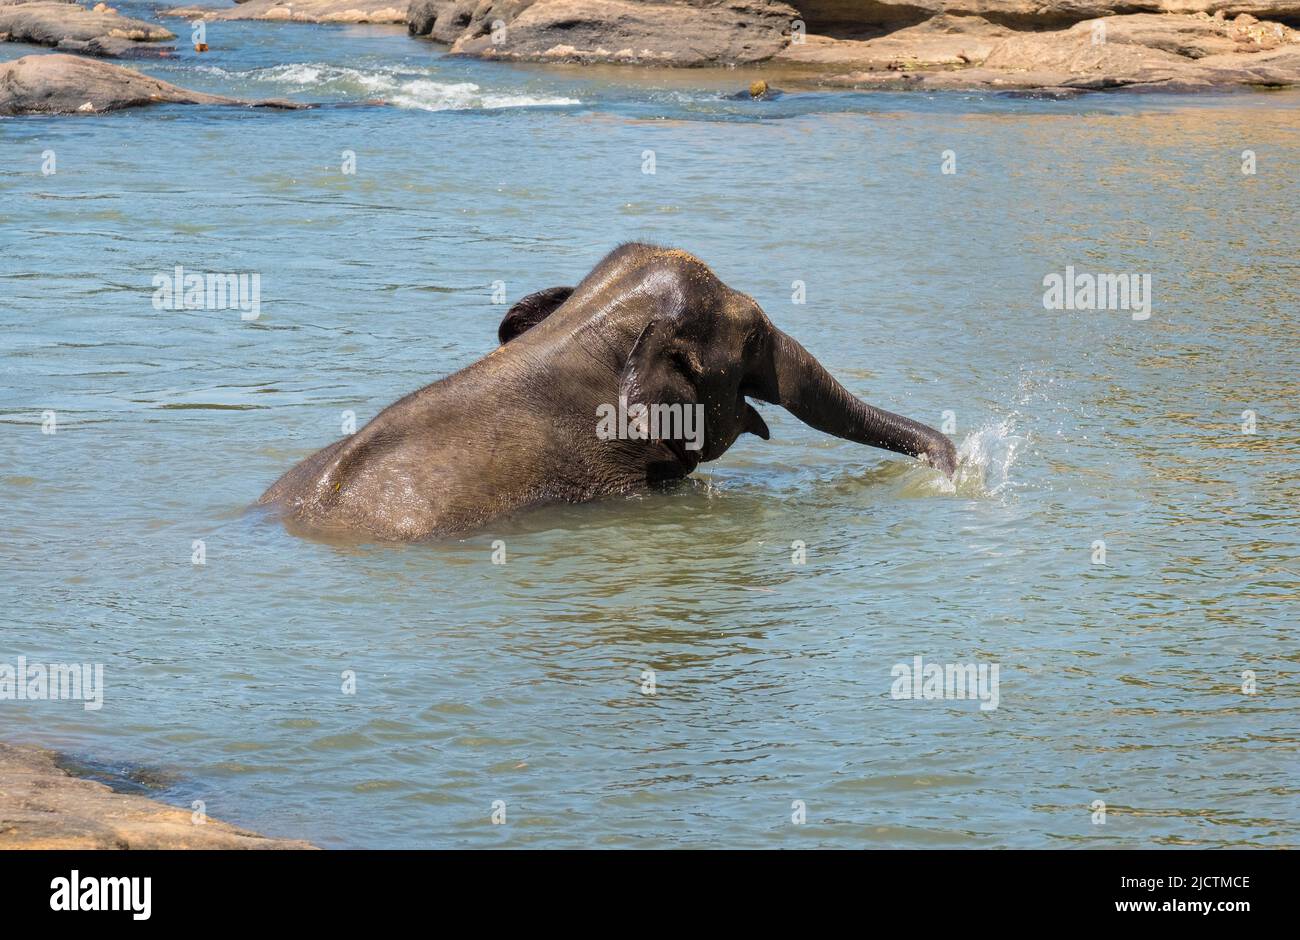 Young elephant calf bathing in a river water, taking a water in trunk and watering itself. Sri Lankan elephant is a subspecies of the Asian elephant. Stock Photo